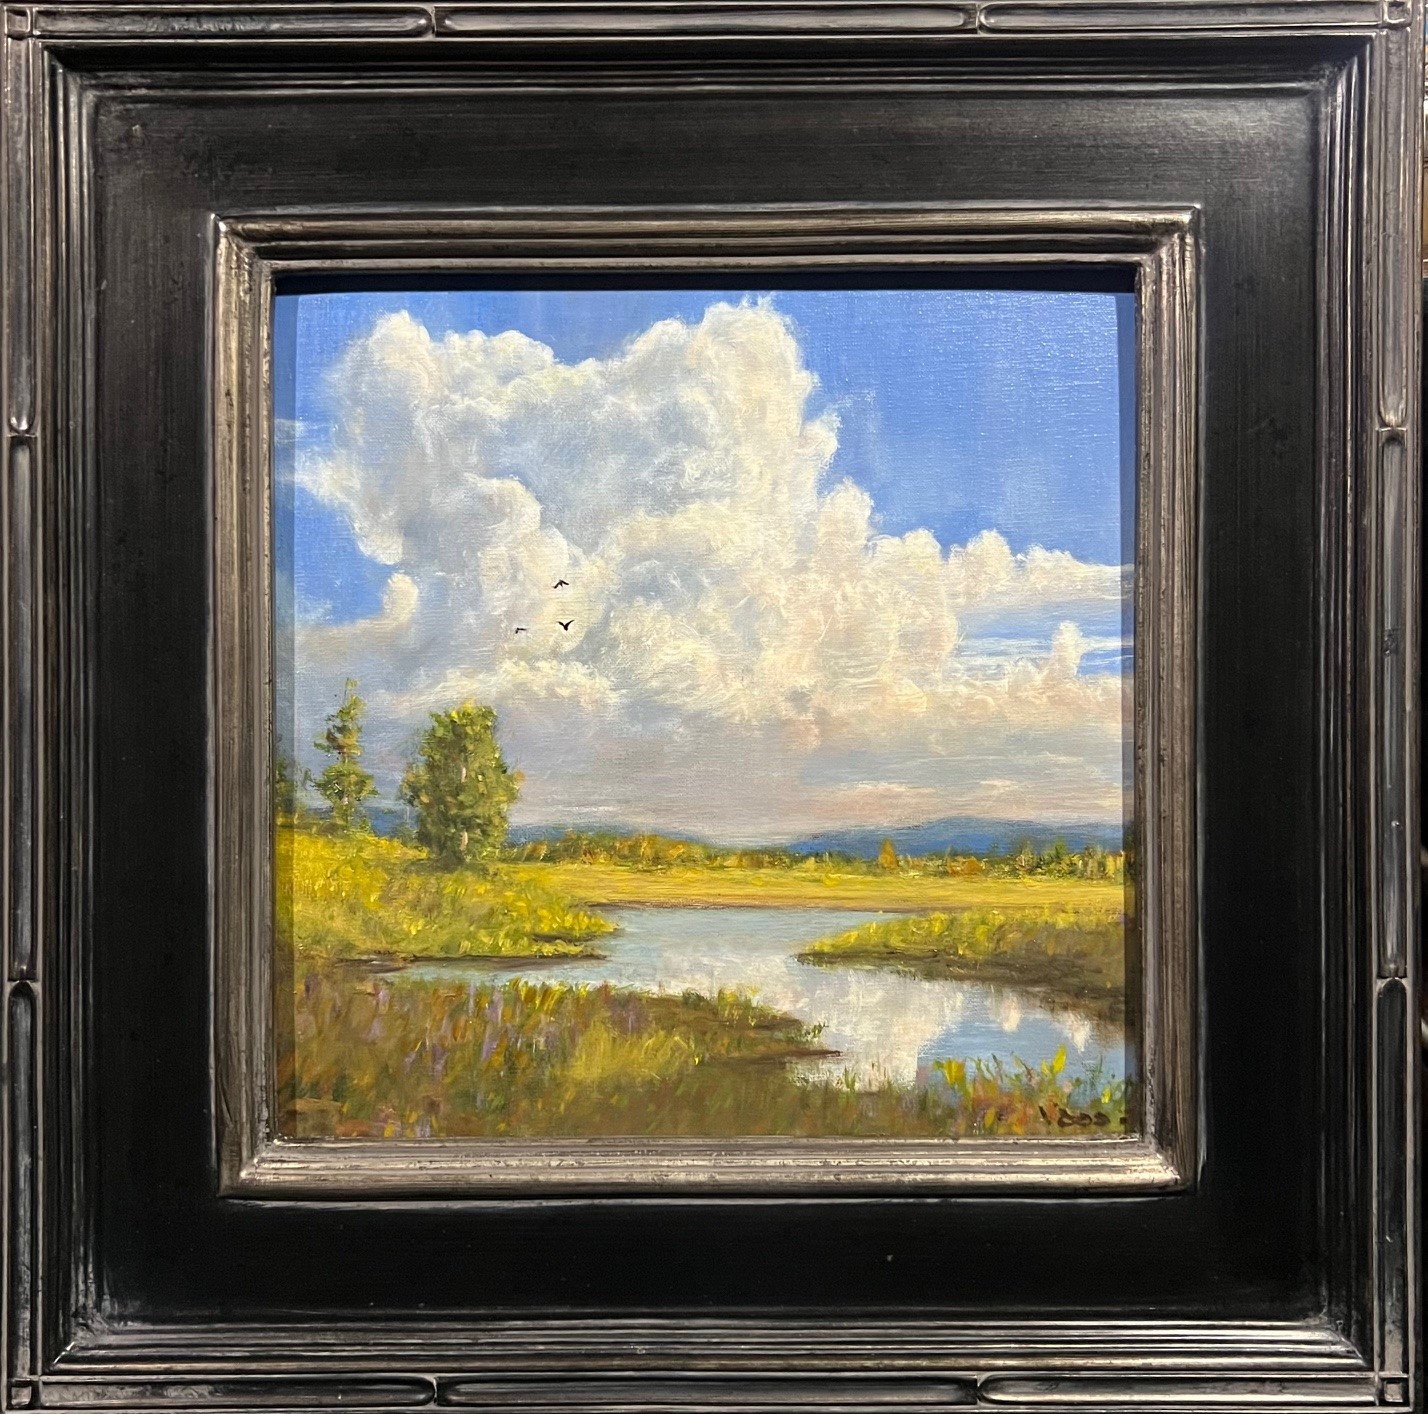 Glorious 12x12 $475 at Hunter Wolff Gallery